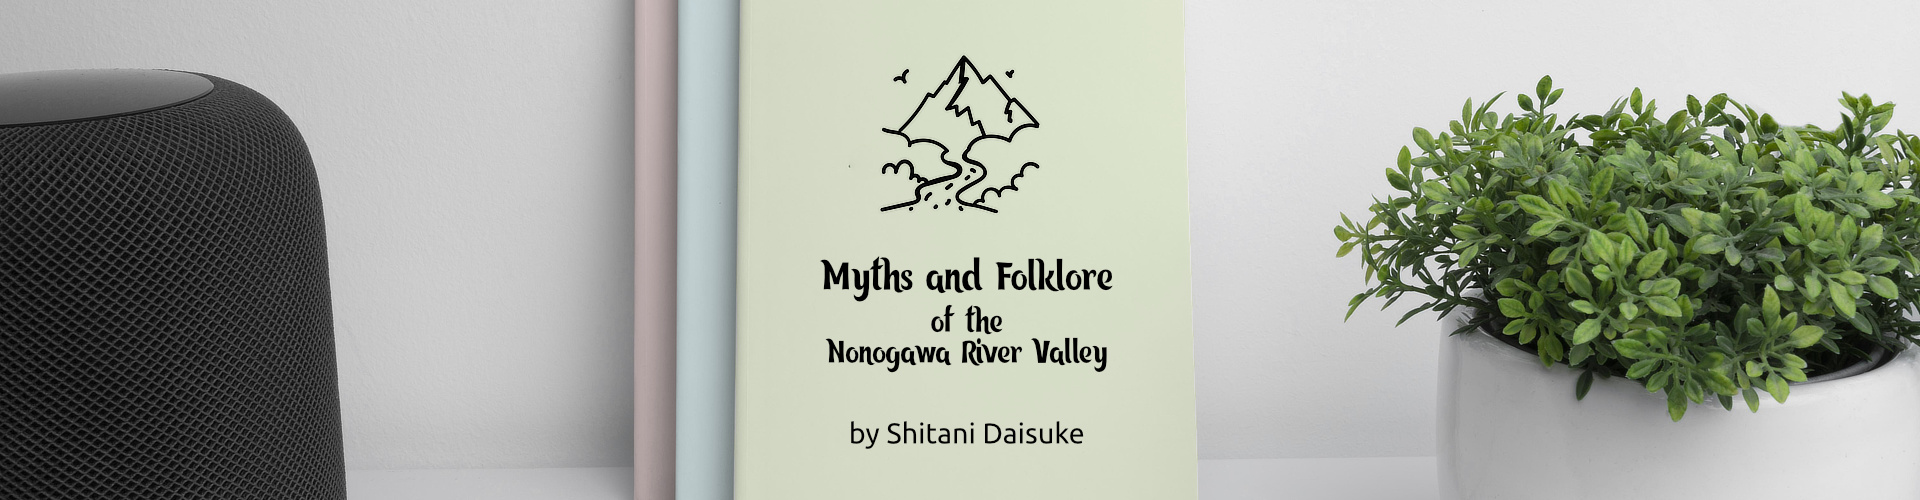 myths and folklore of the nonogawa river valley - cover